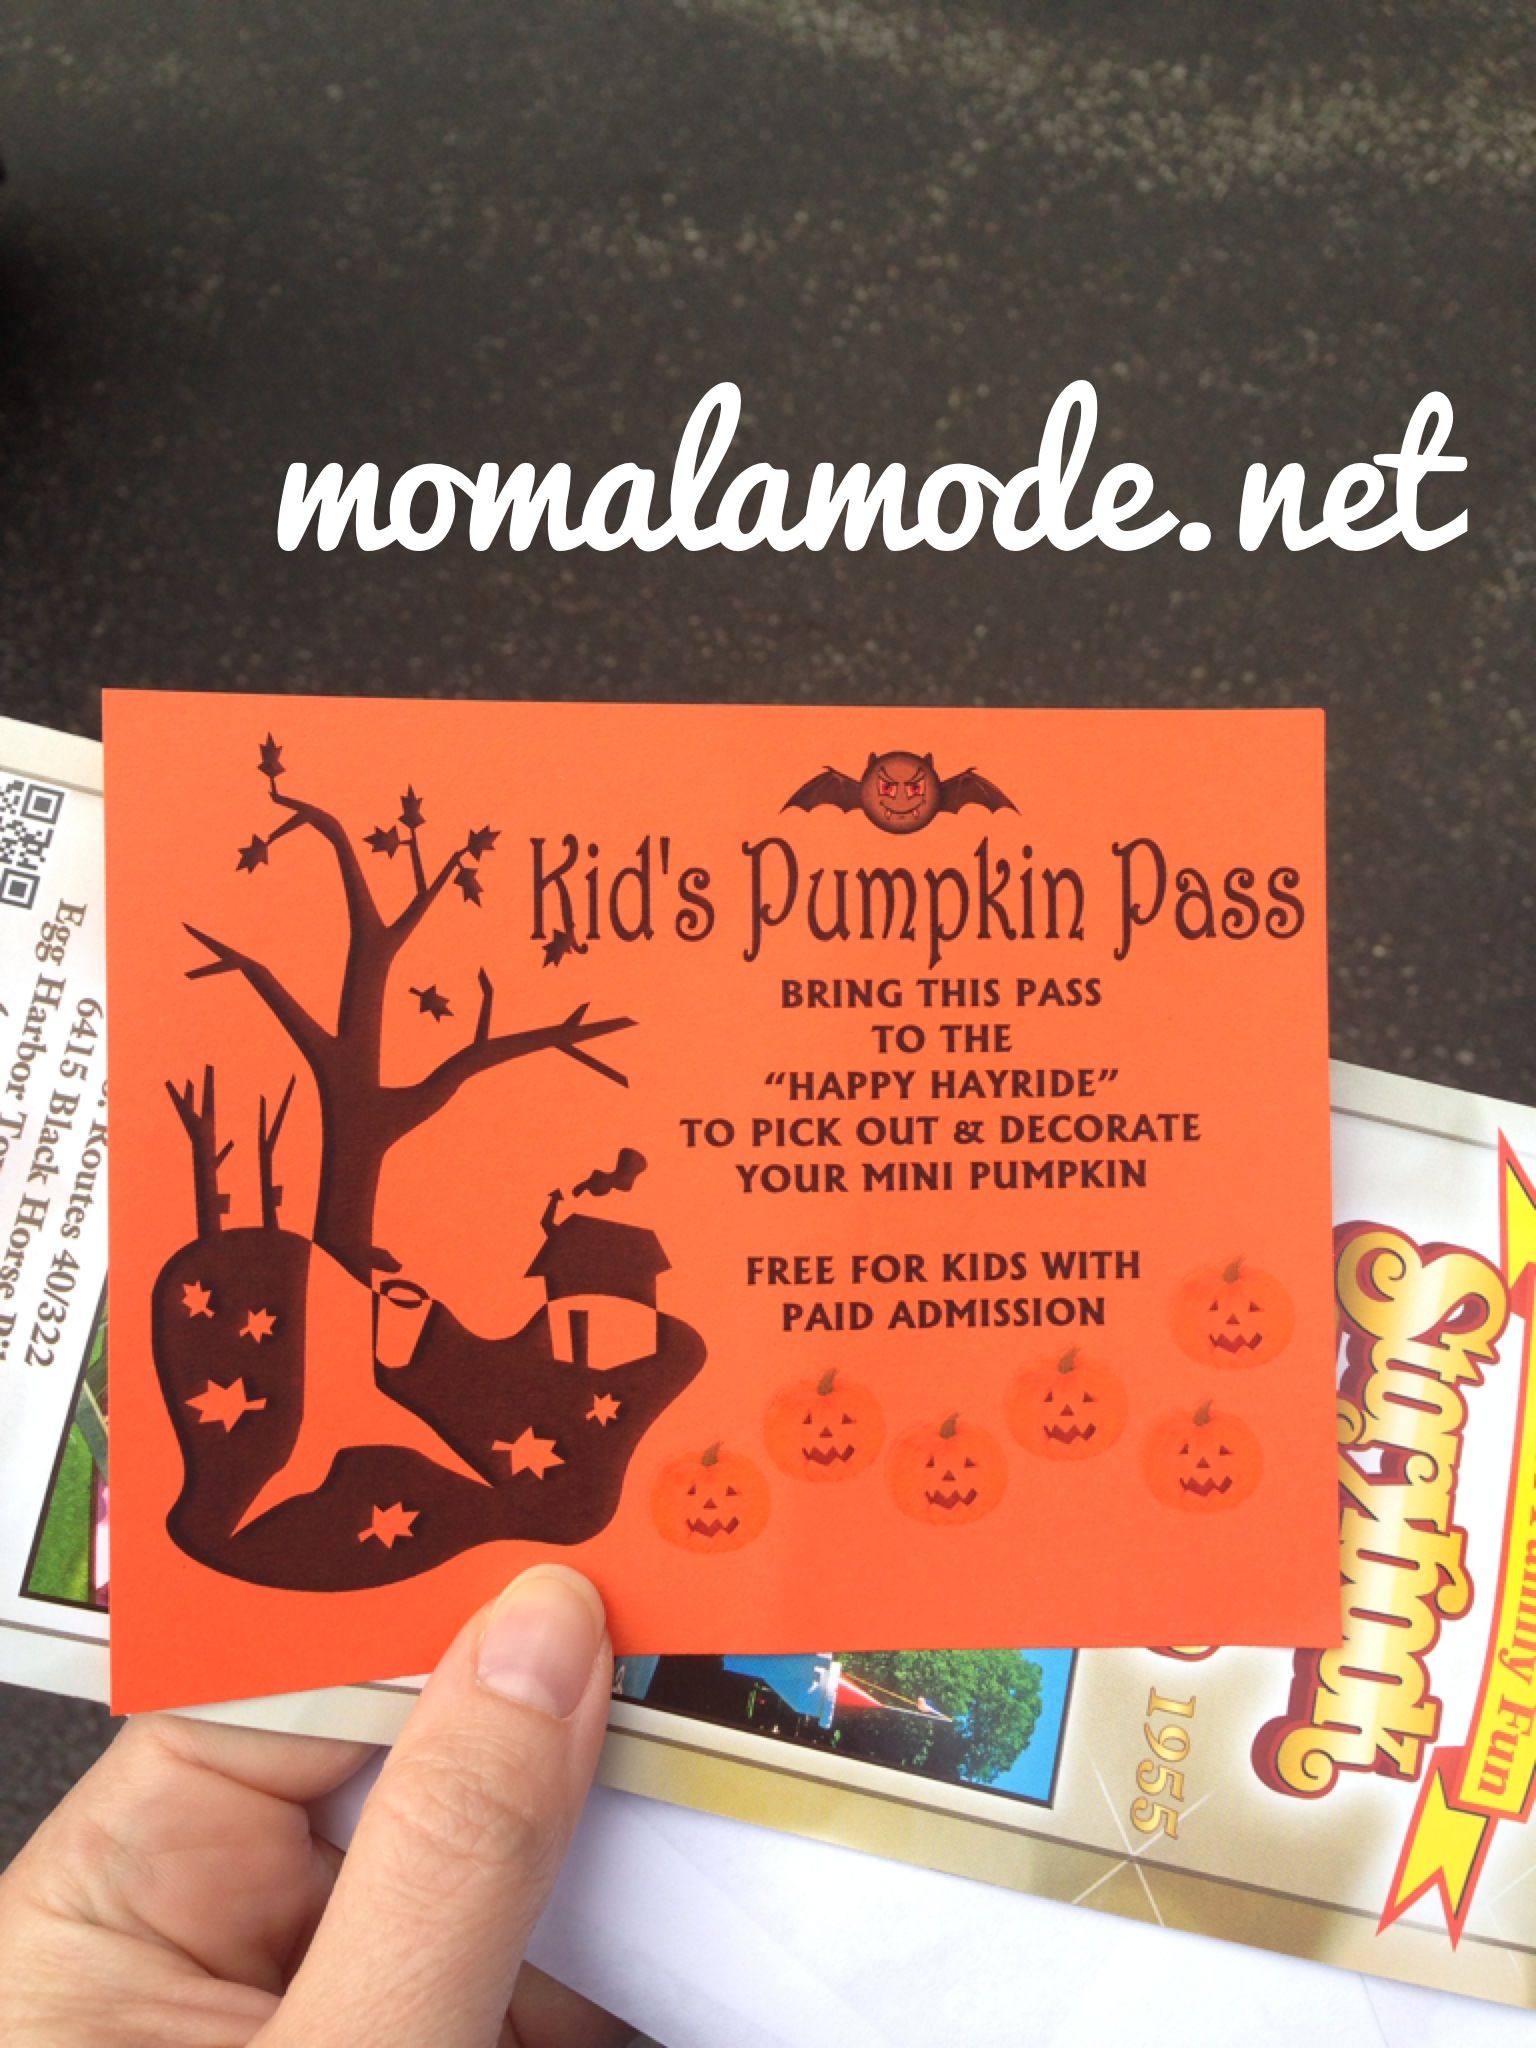 Each child receives a Pumpkin Pass that allows them to select a pumpkin to  decorate on-the-spot after their hayride